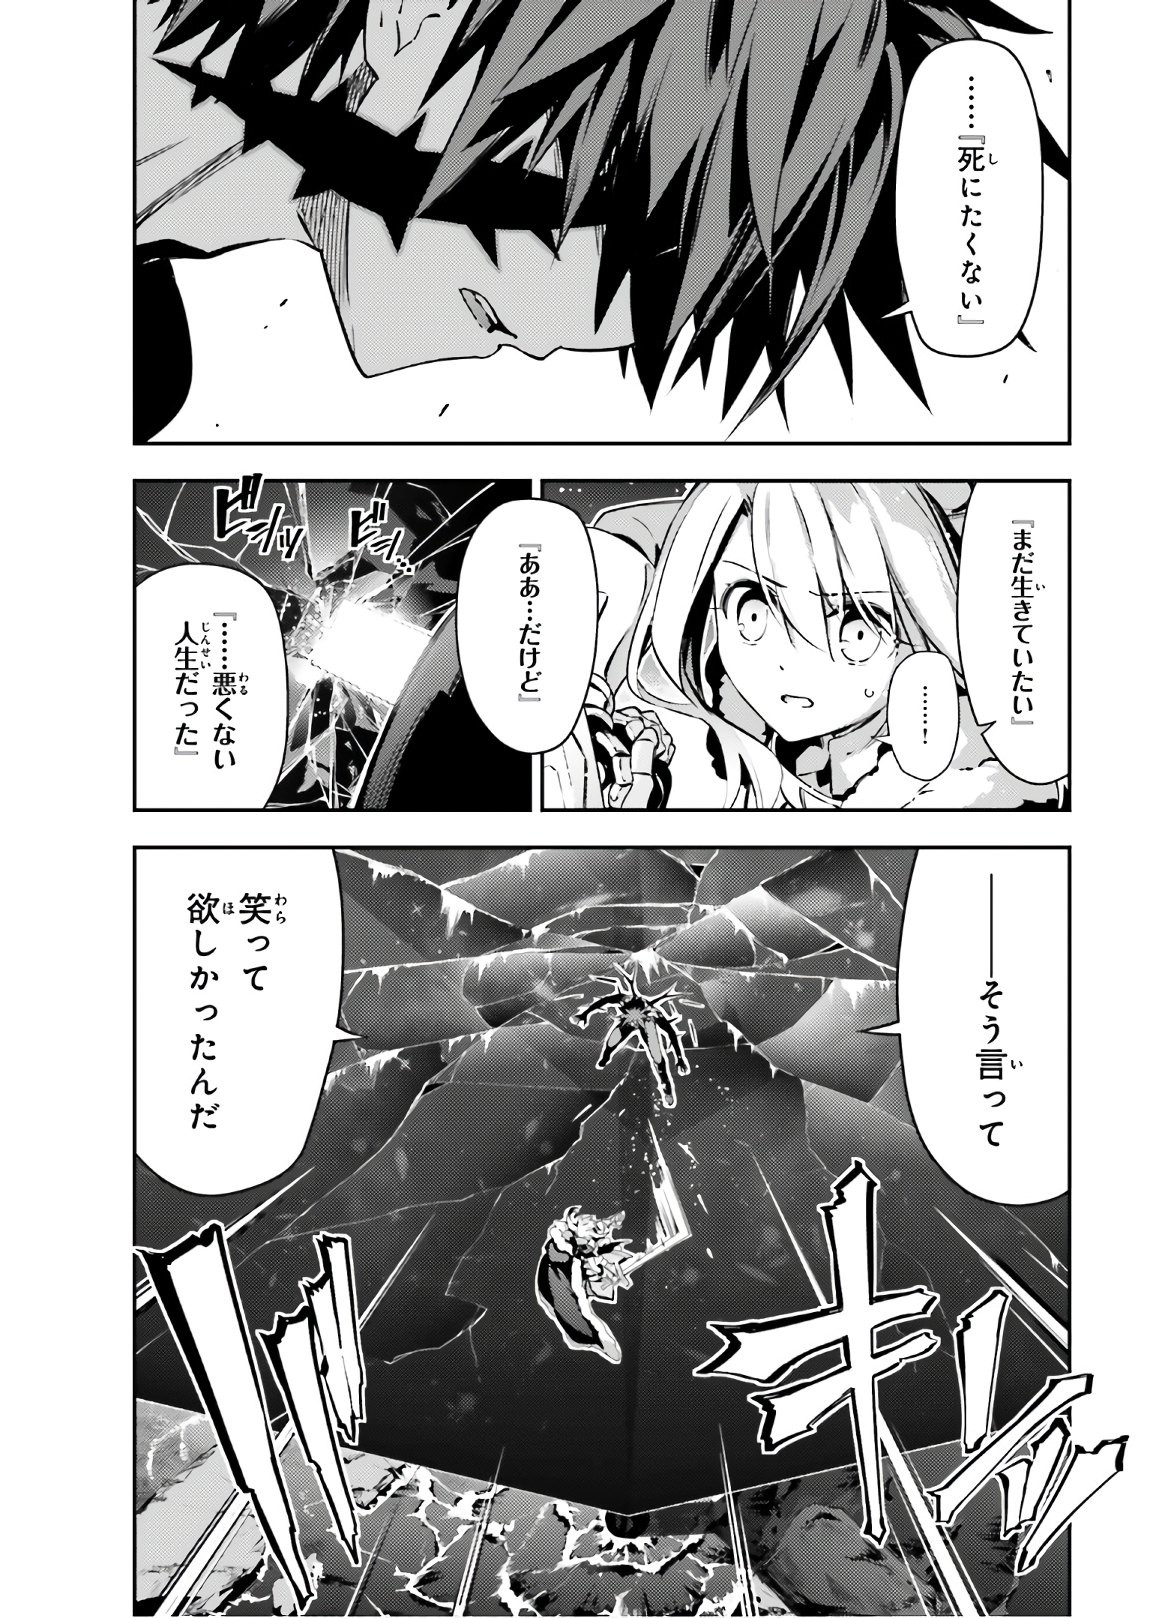 Fate/Kaleid Liner Prisma Illya Drei! - Chapter 57-1 - Page 3